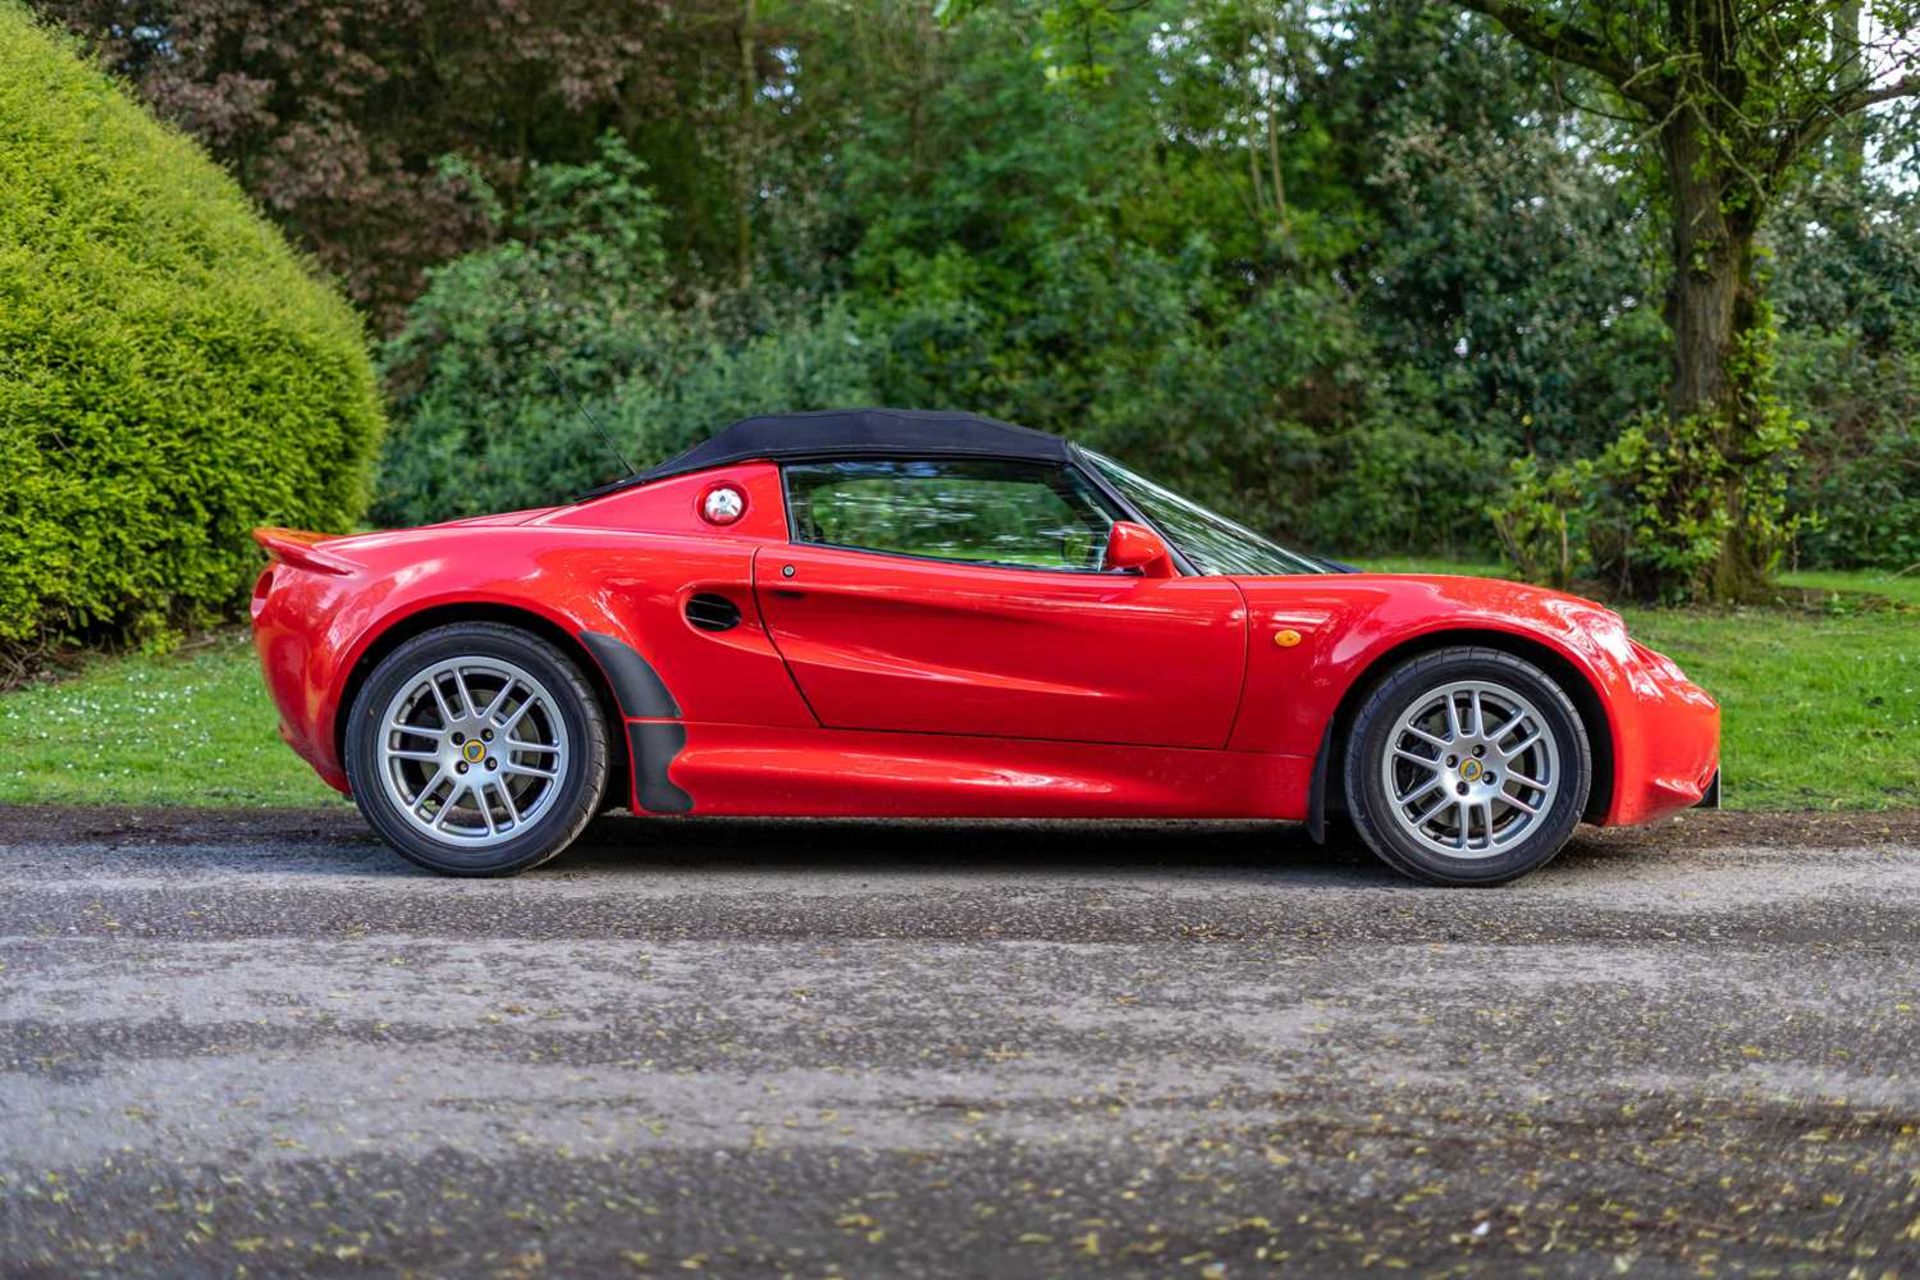 1999 Lotus Elise S1 Only 39,000 miles from new - Image 7 of 57